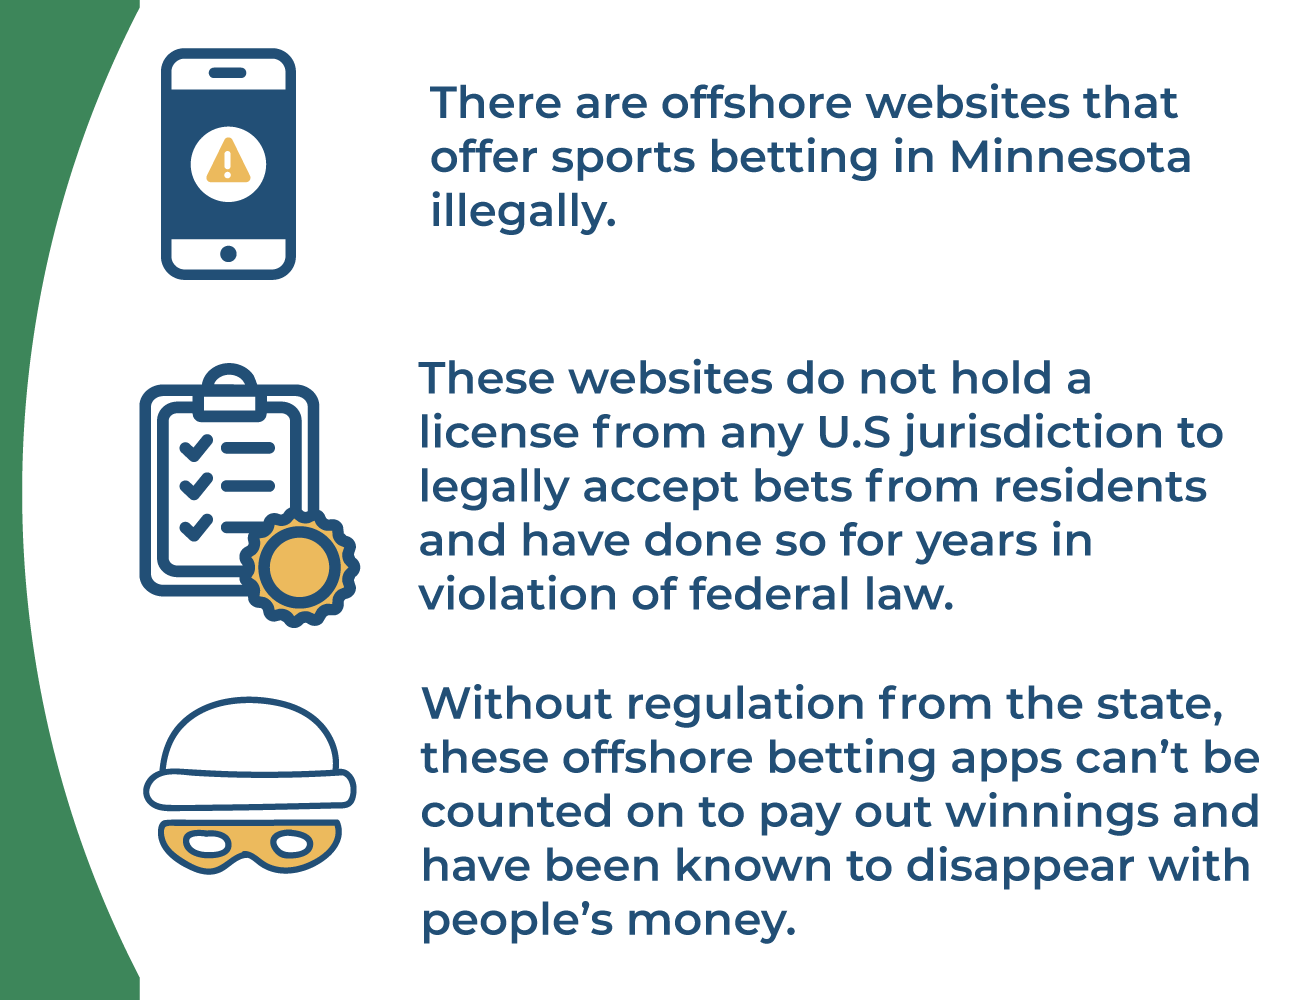 There are offshore websites that offer sports betting in Minnesota illegally. These websites do not hold a license from any U.S jurisdiction to legally accept bets from residents and have done so for years in violation of federal law. Without regulation from the state, these offshore betting apps can’t be counted on to pay out winnings and have been known to disappear with people’s money.